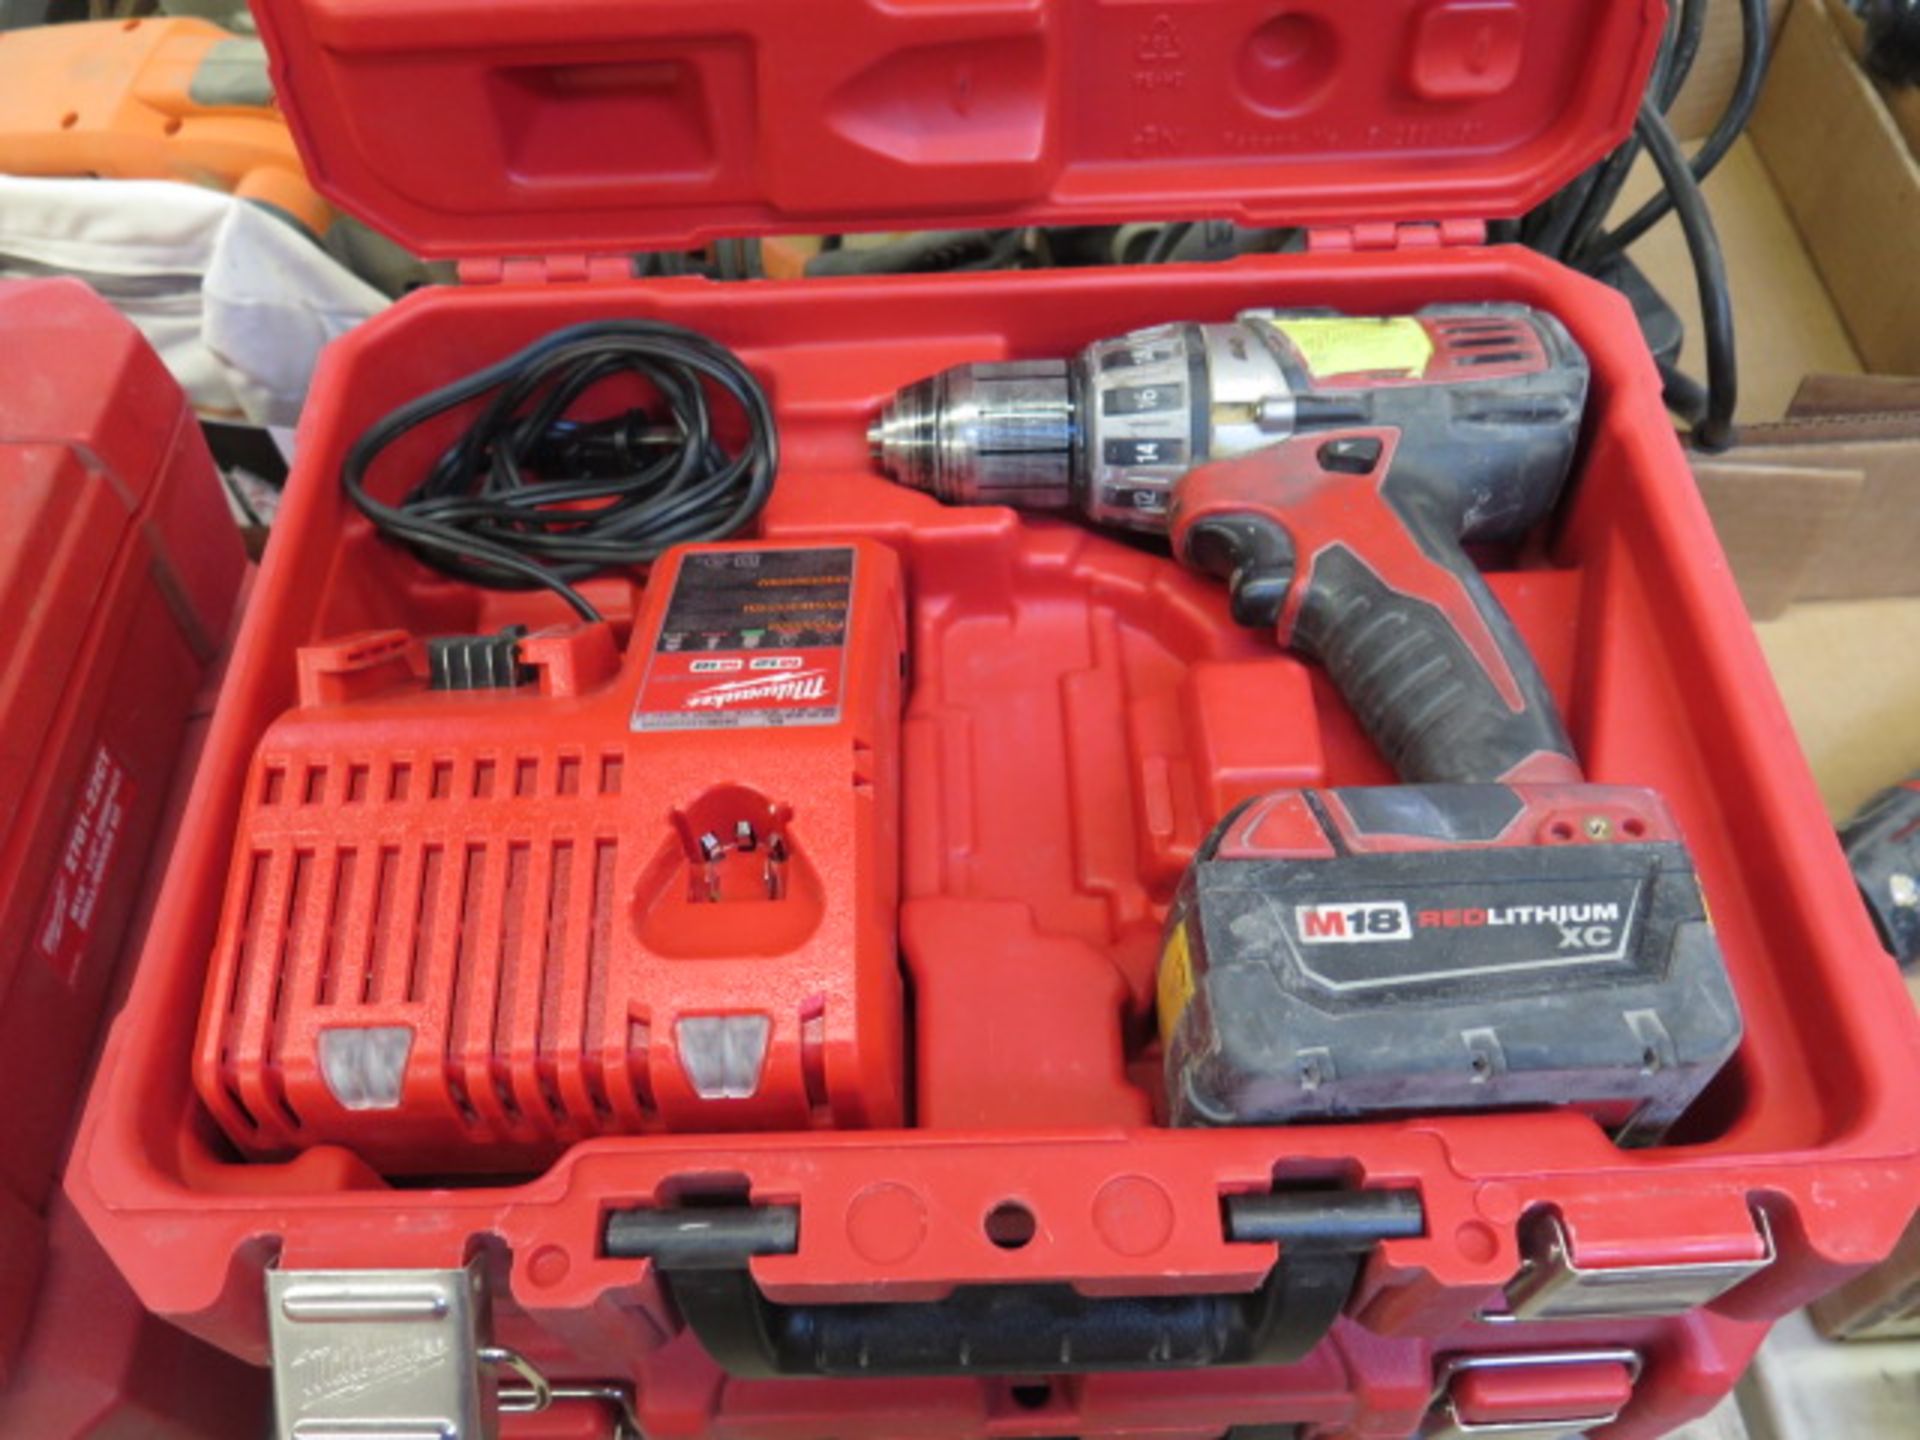 Milwaukee 18Volt Drill Kits (2) w/ Chargers (SOLD AS-IS - NO WARRANTY) - Image 2 of 5